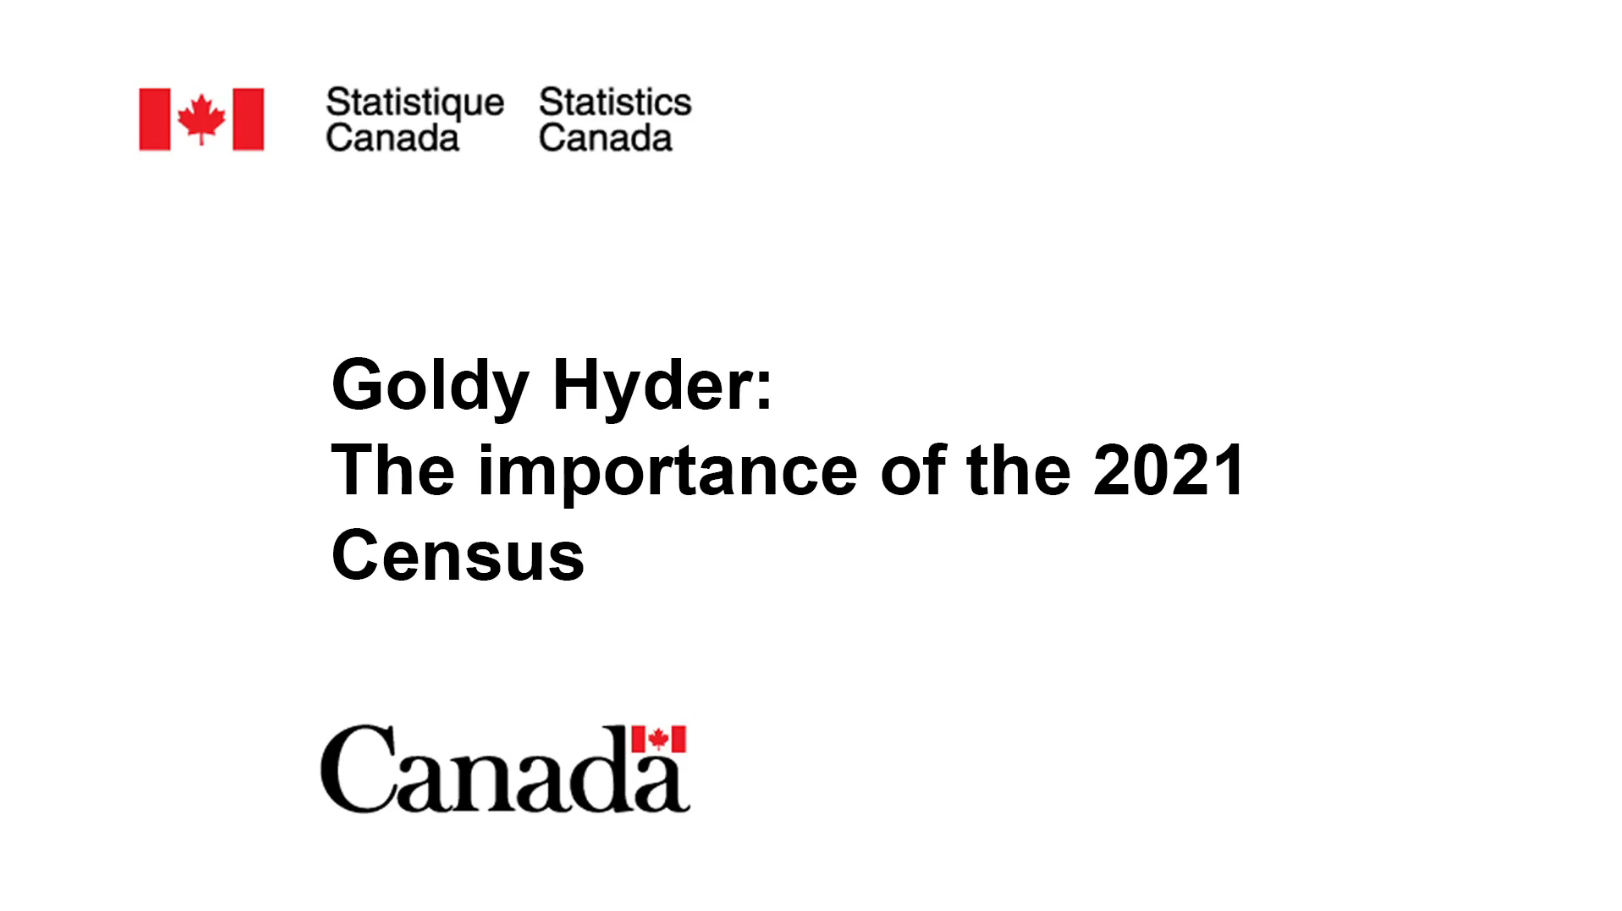 Video: Goldy Hyder: The Importance of the 2021 Census